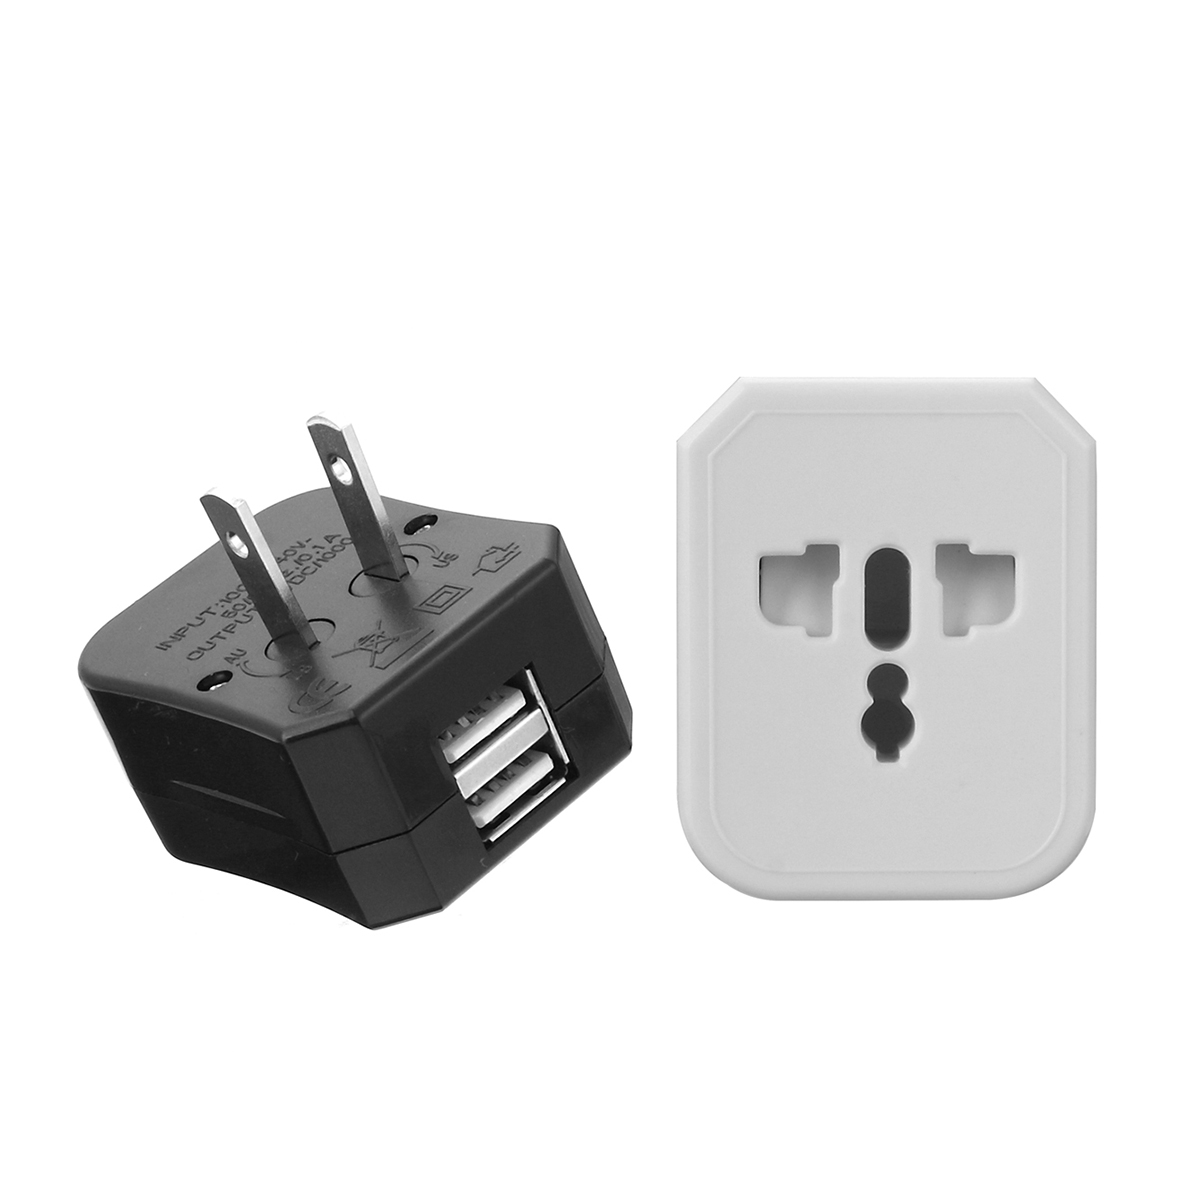 Travel-Adapter-Universal-Power-Adapter-with-2-USB-Ports-Wall-Charger-AC-Power-Plug-1304296-6